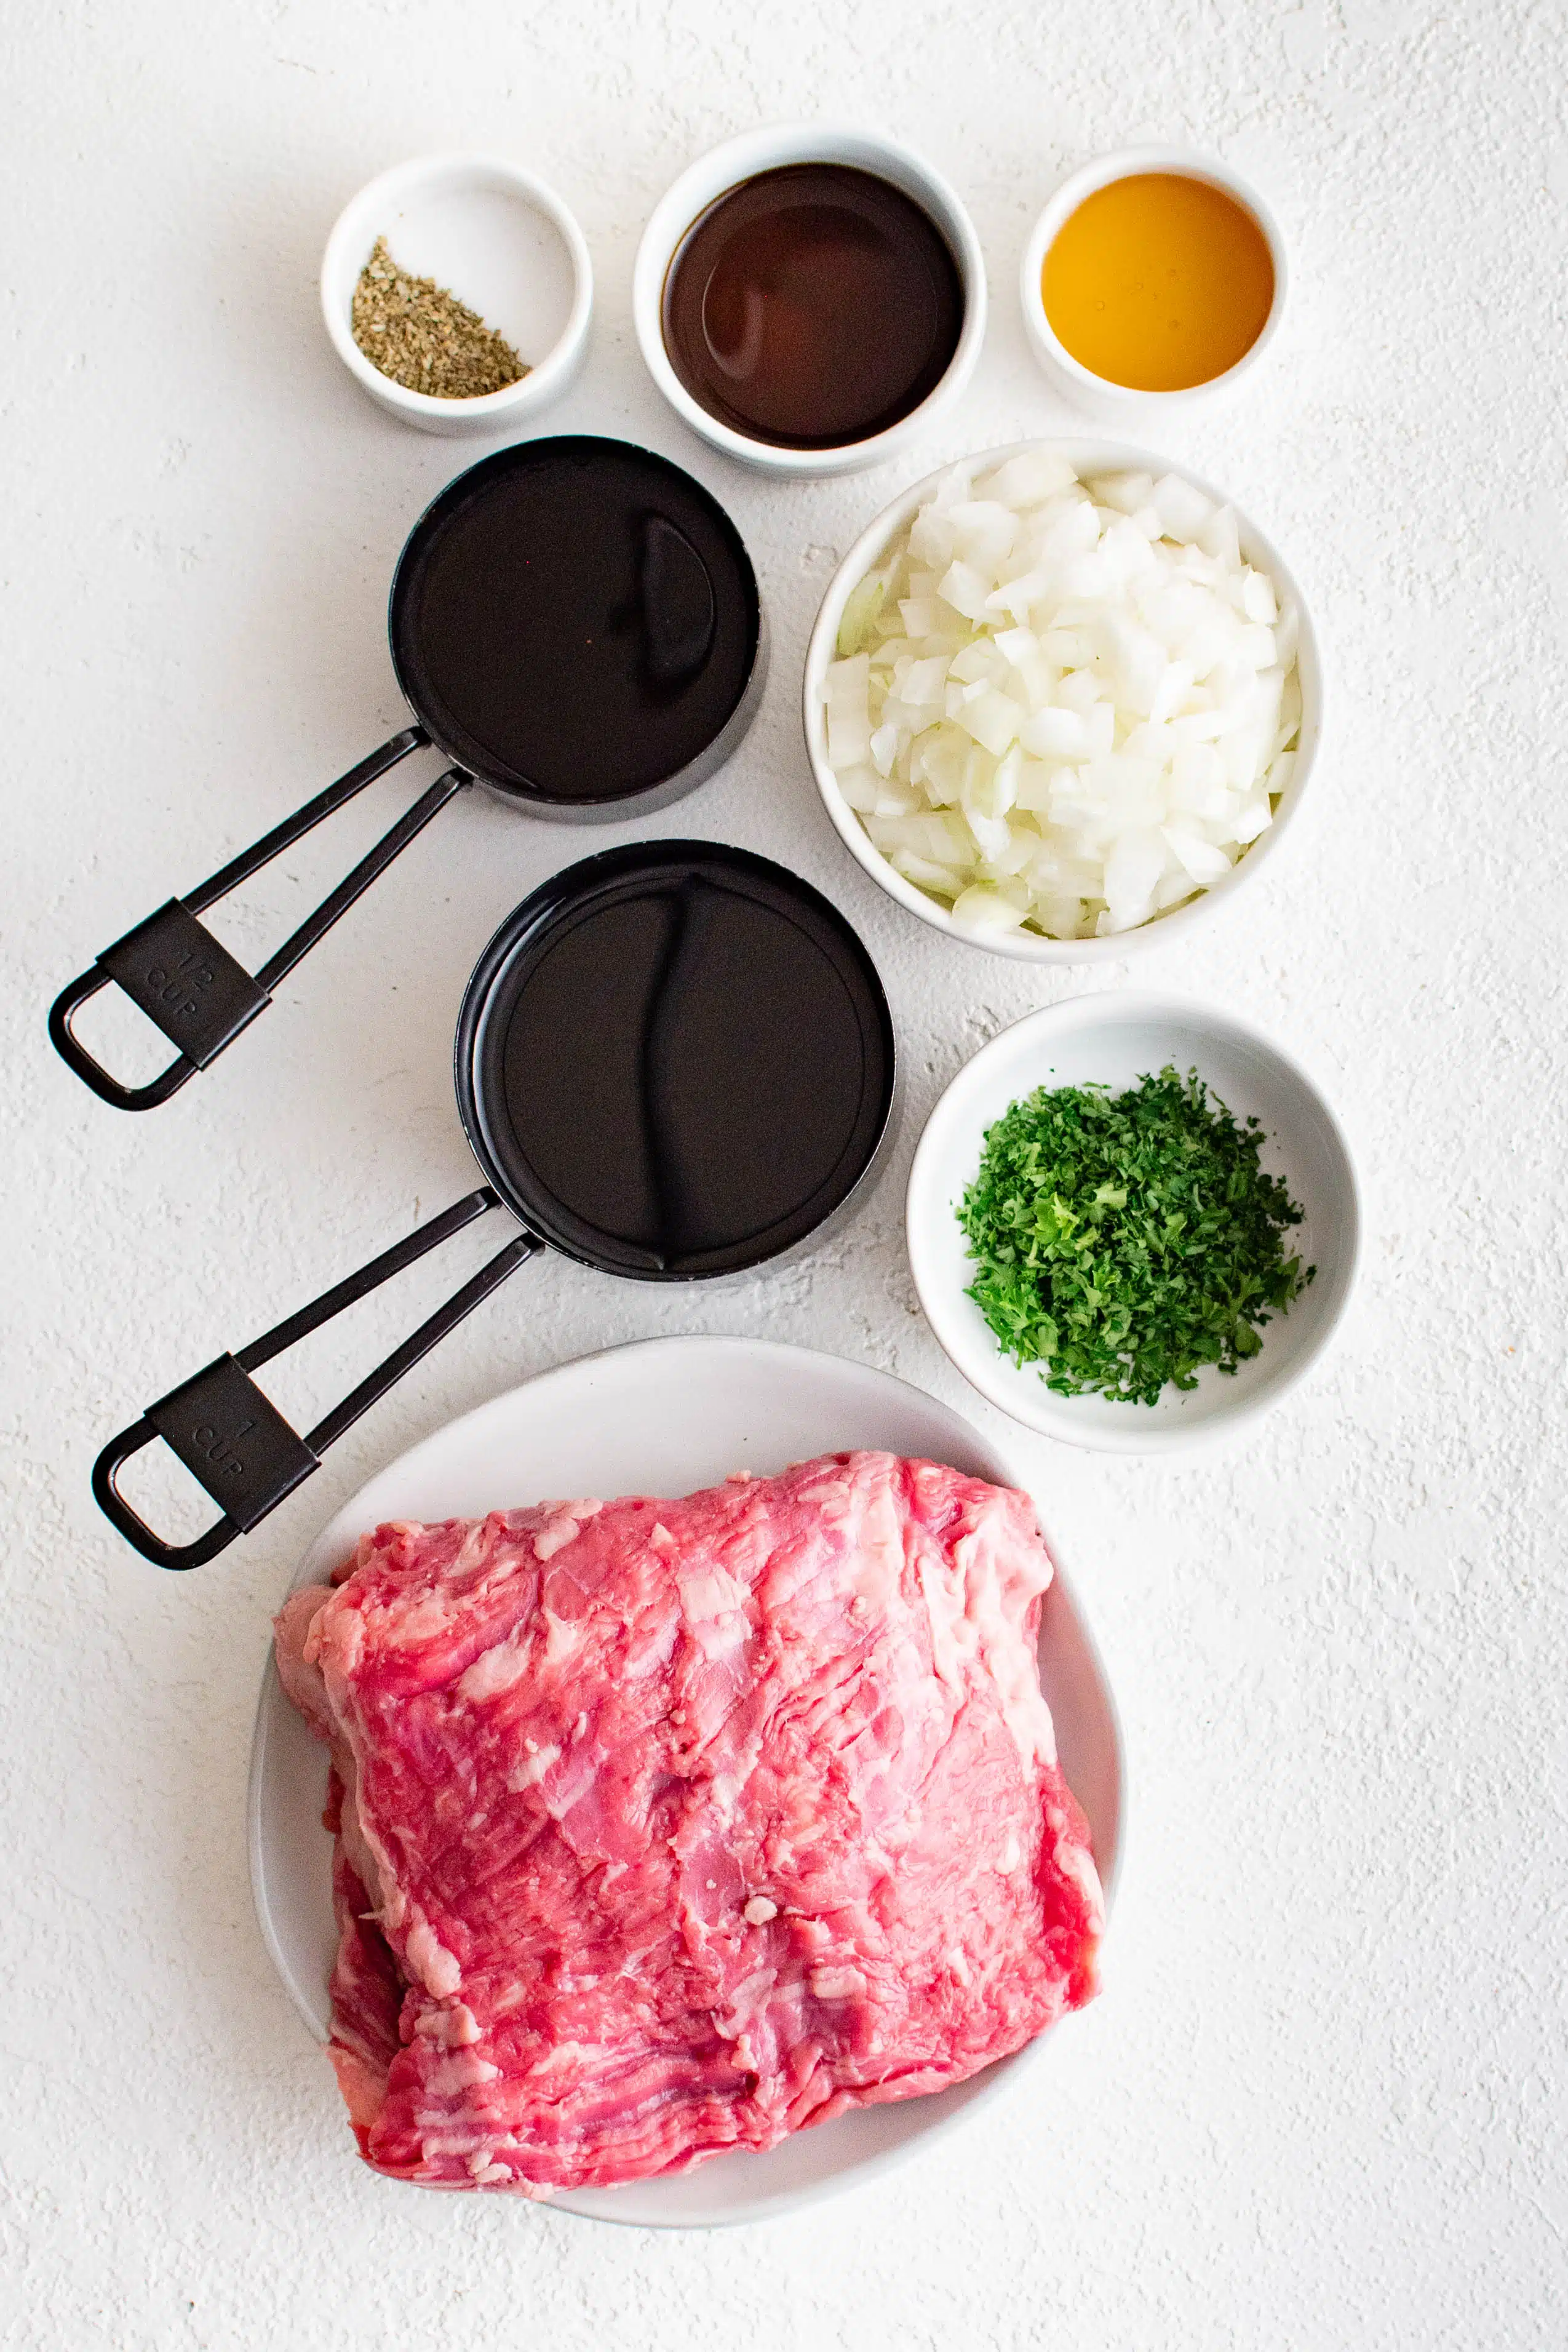 All of the ingredients to make grilled marinated skirt steak on a white table ib individual bowls.